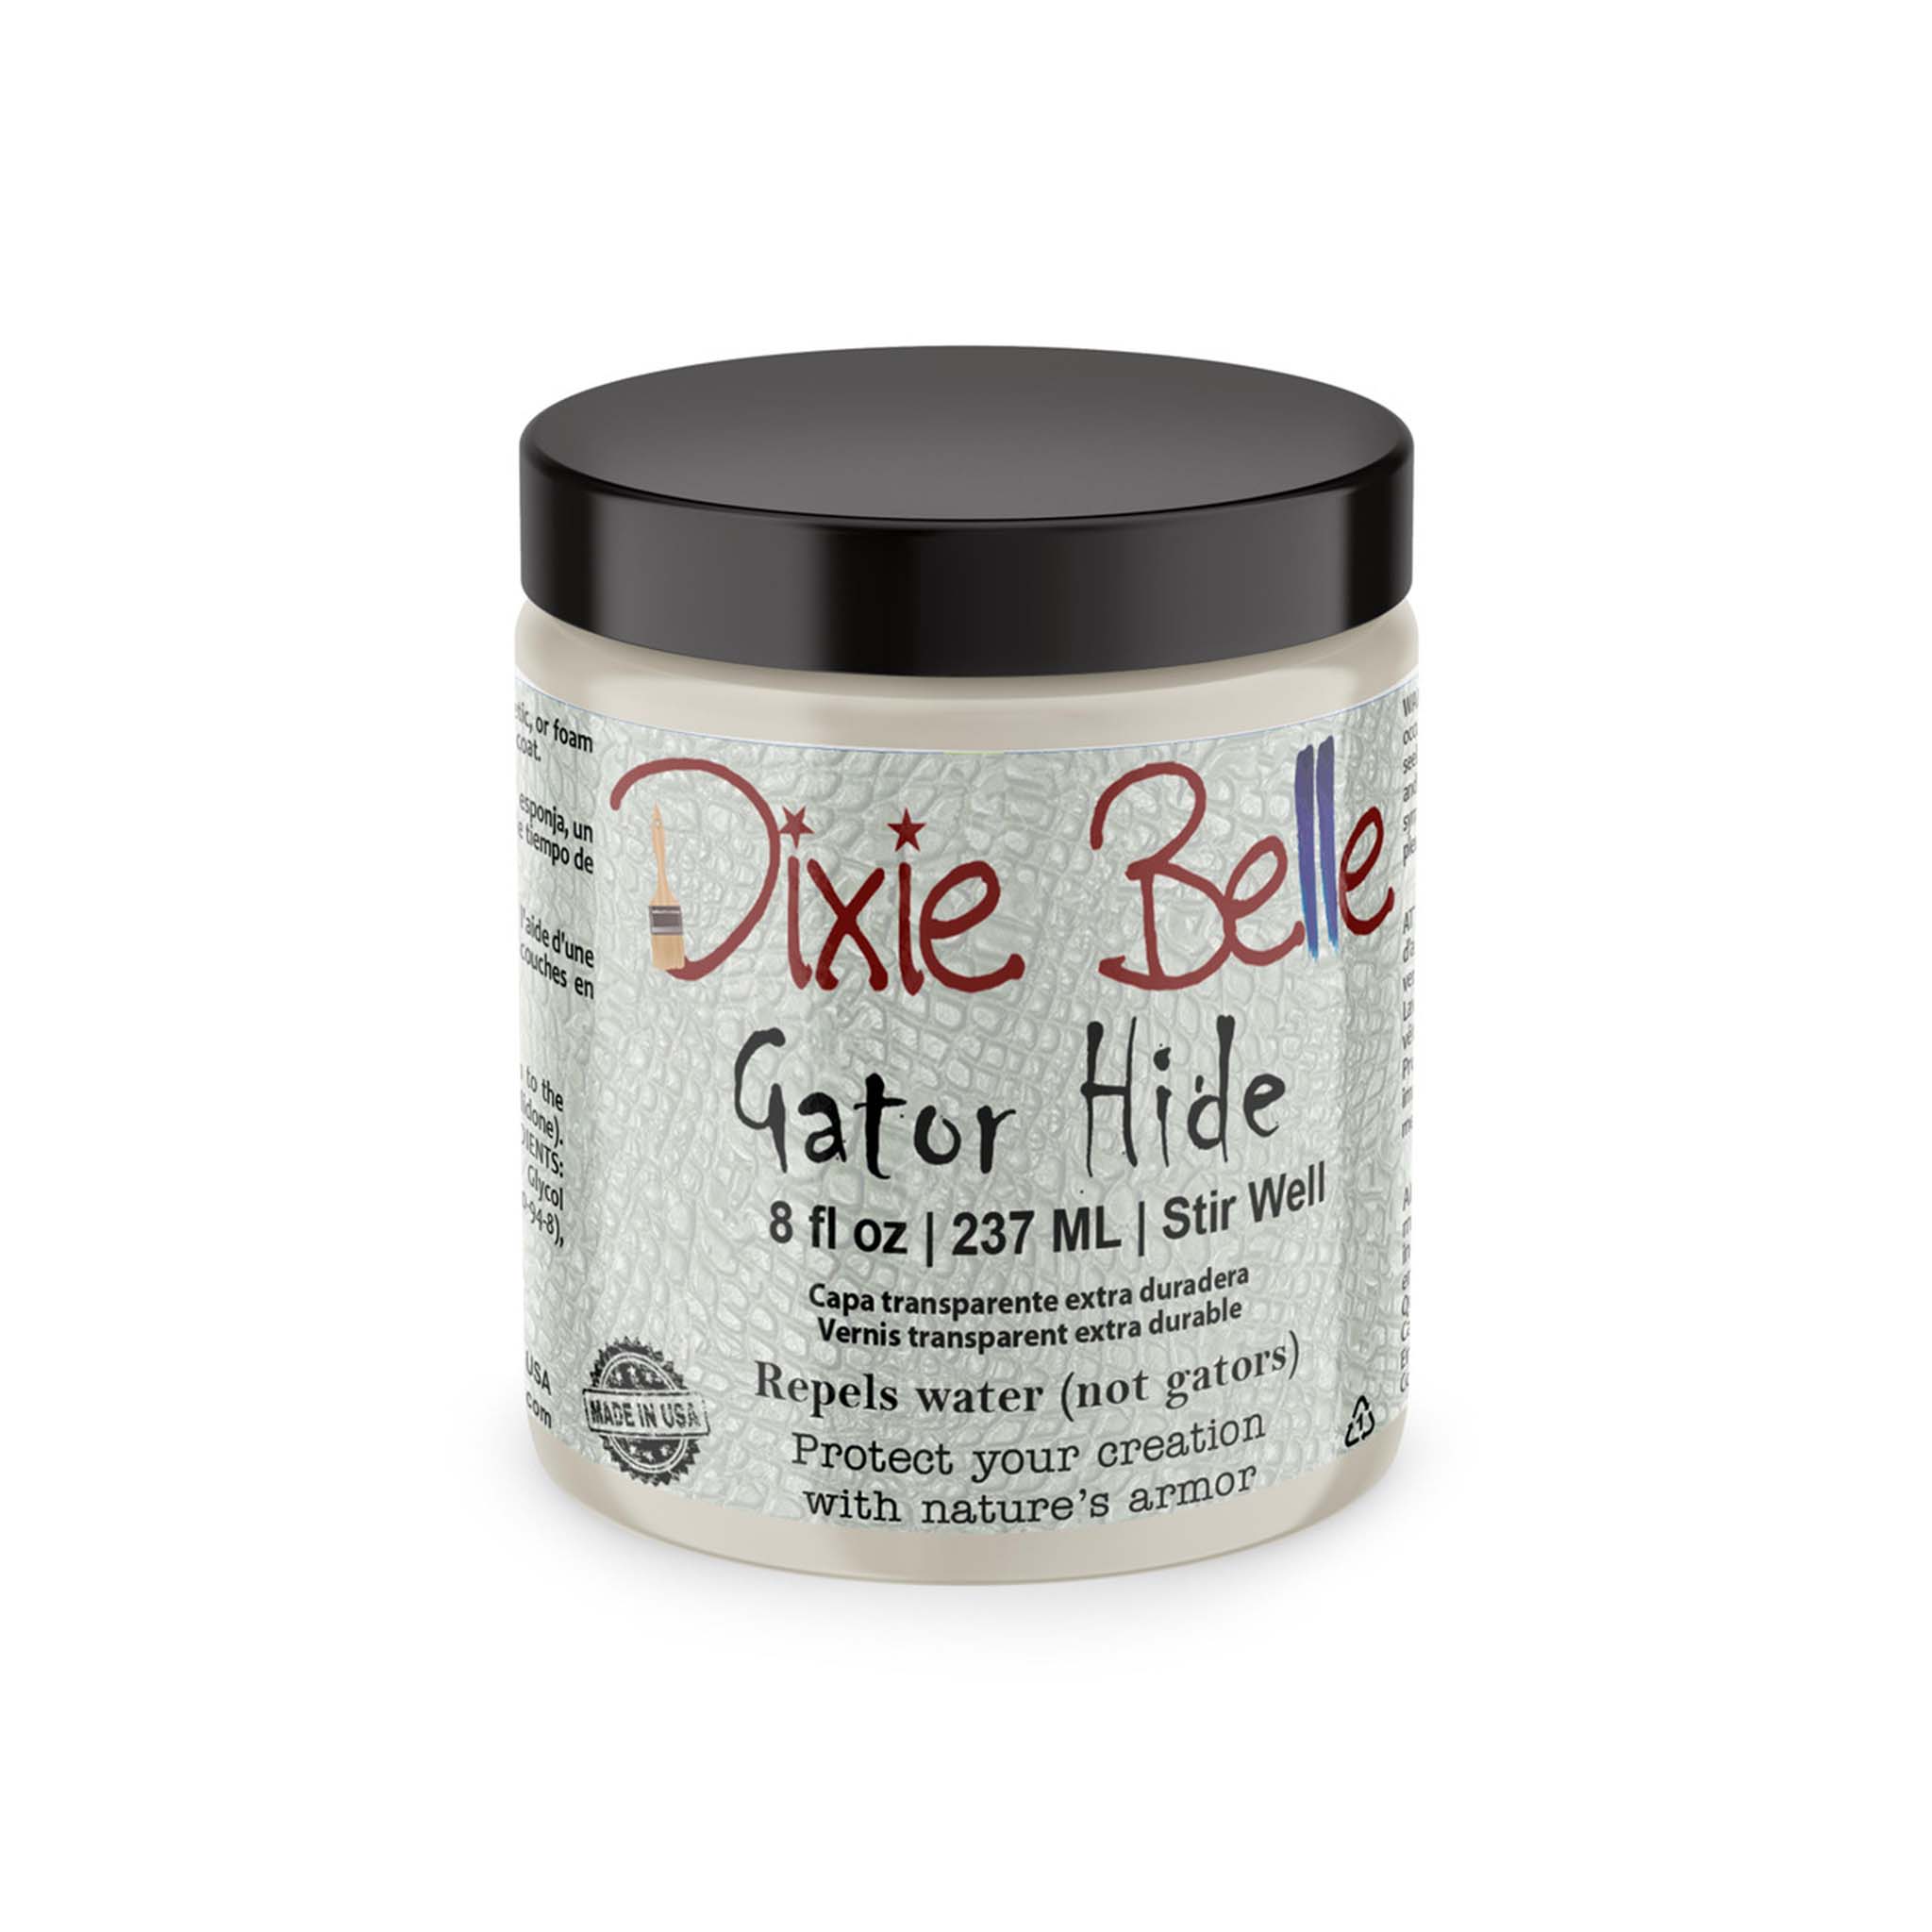 An 8oz container of Dixie Belle's Gator Hide is against a white background.